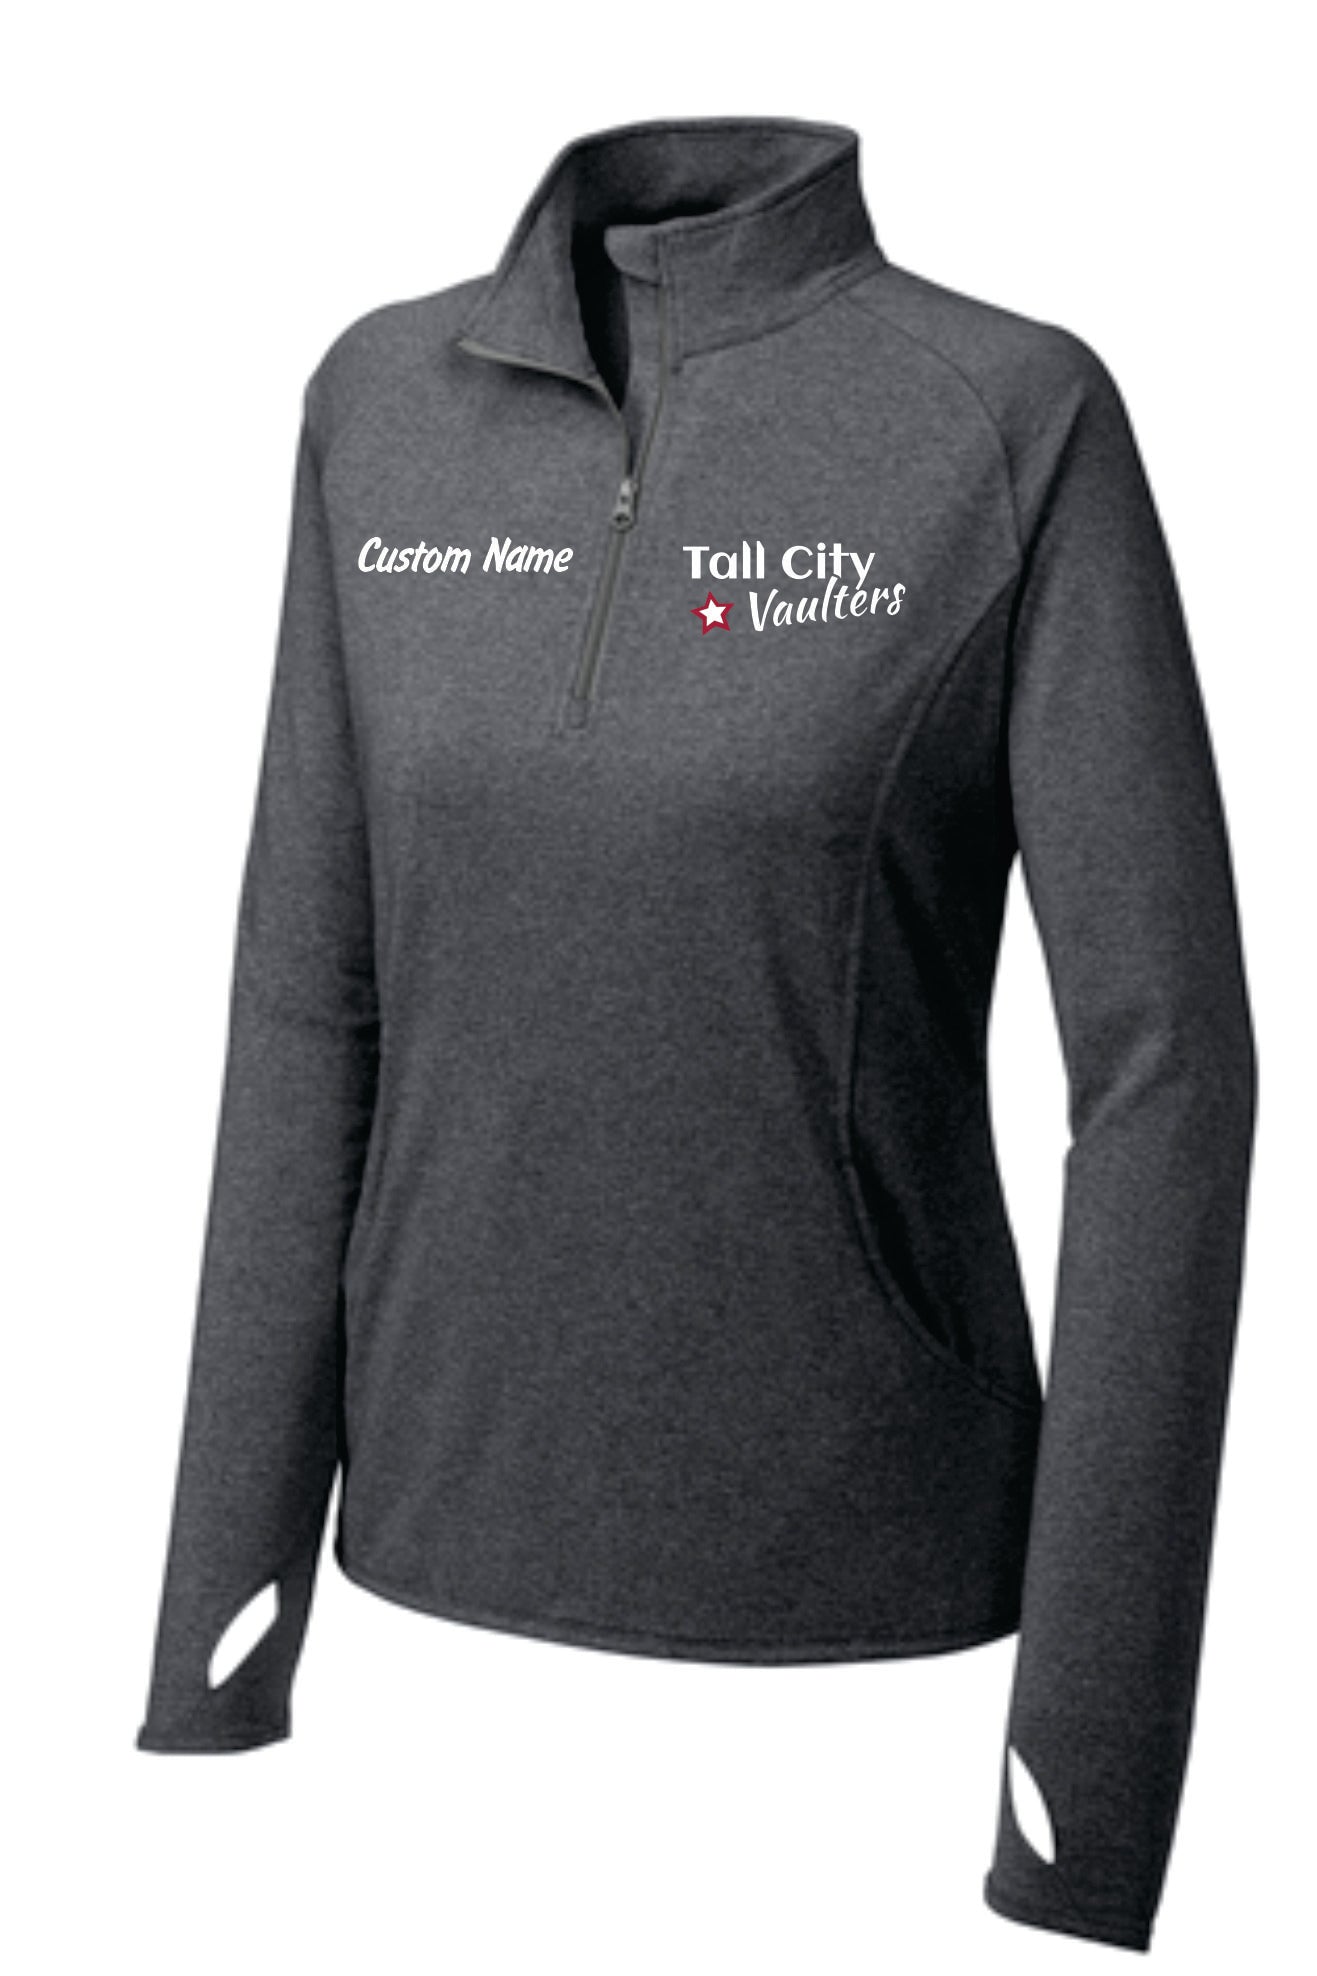 Tall City Vaulters 1/4 Zips, Custom Name INCLUDED